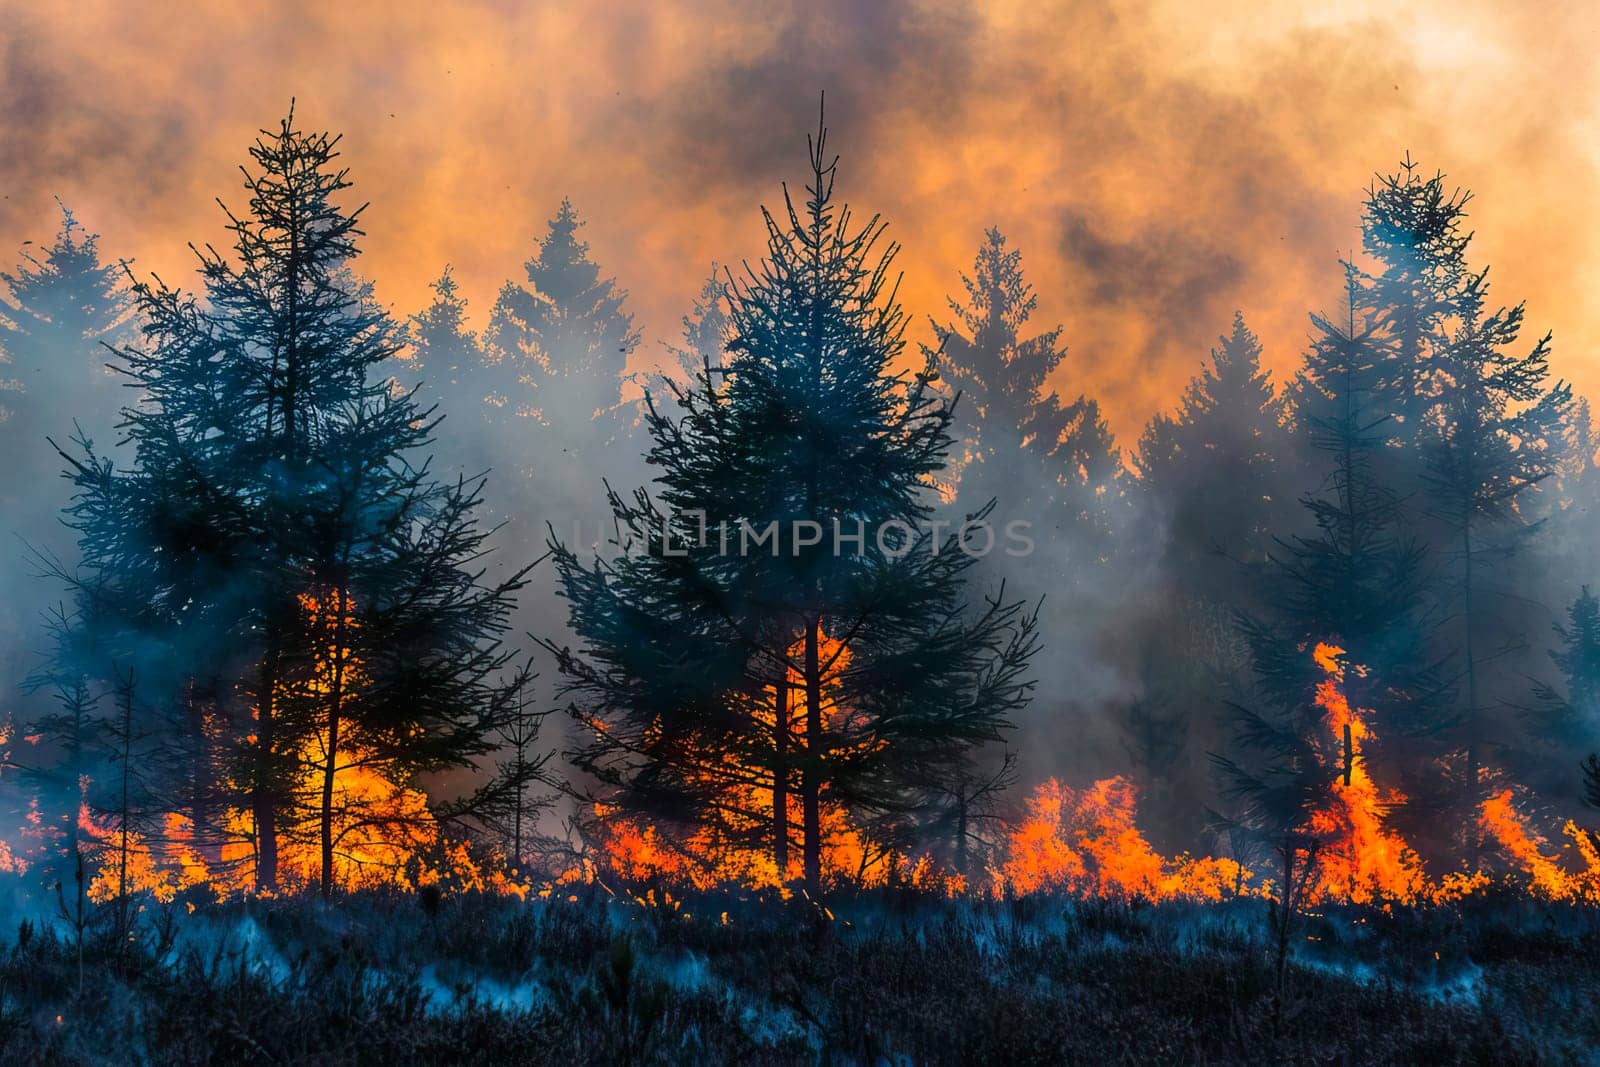 A forest with numerous trees burning intensely, smoke covering the sky.